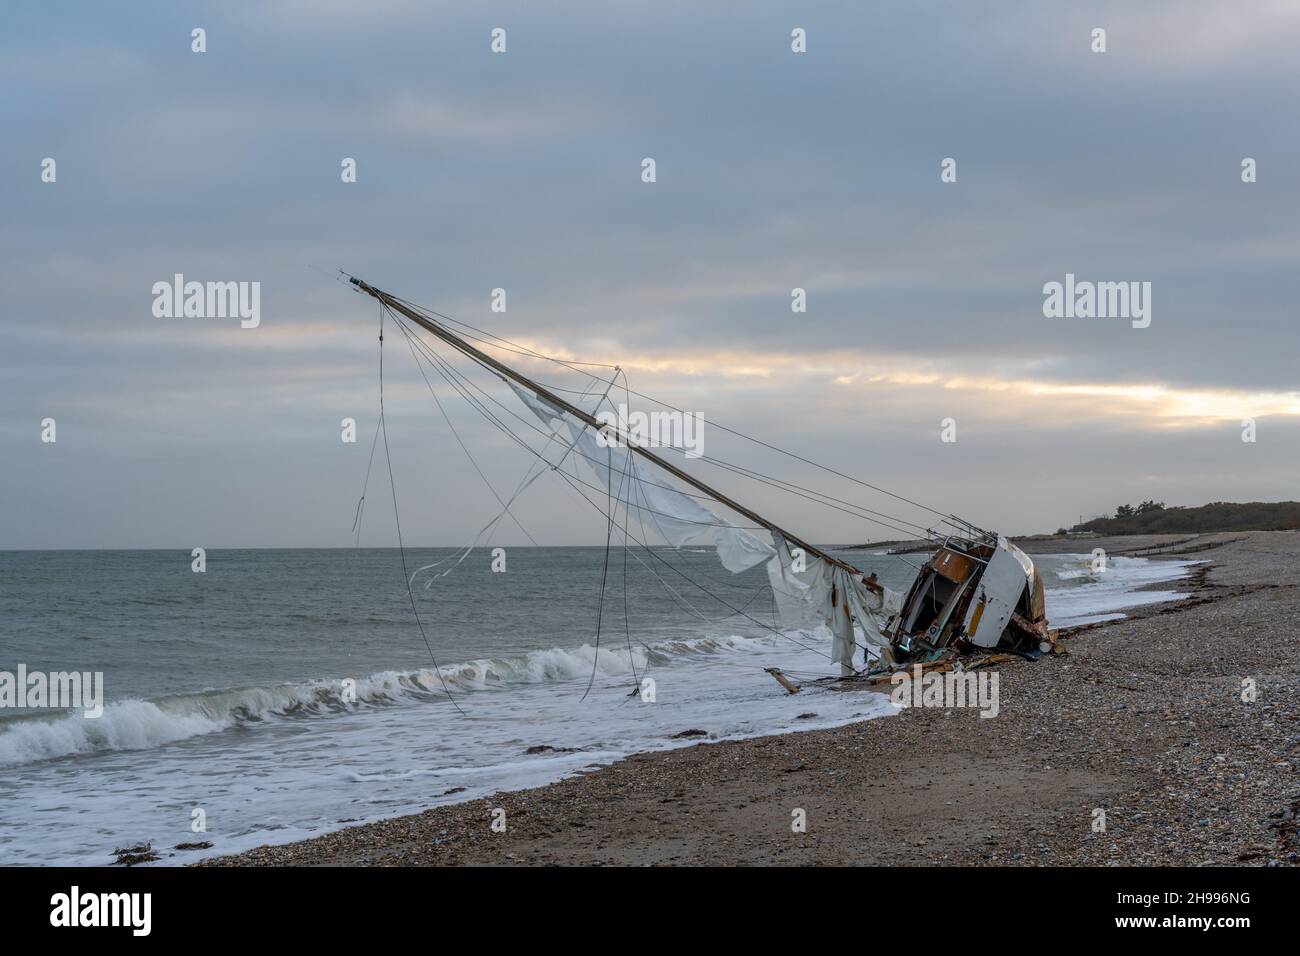 Abandoned and shipwrecked sailing boat aground on the beach at Church Norton between Pagham and Selsey near Chichester in West Sussex. Stock Photo